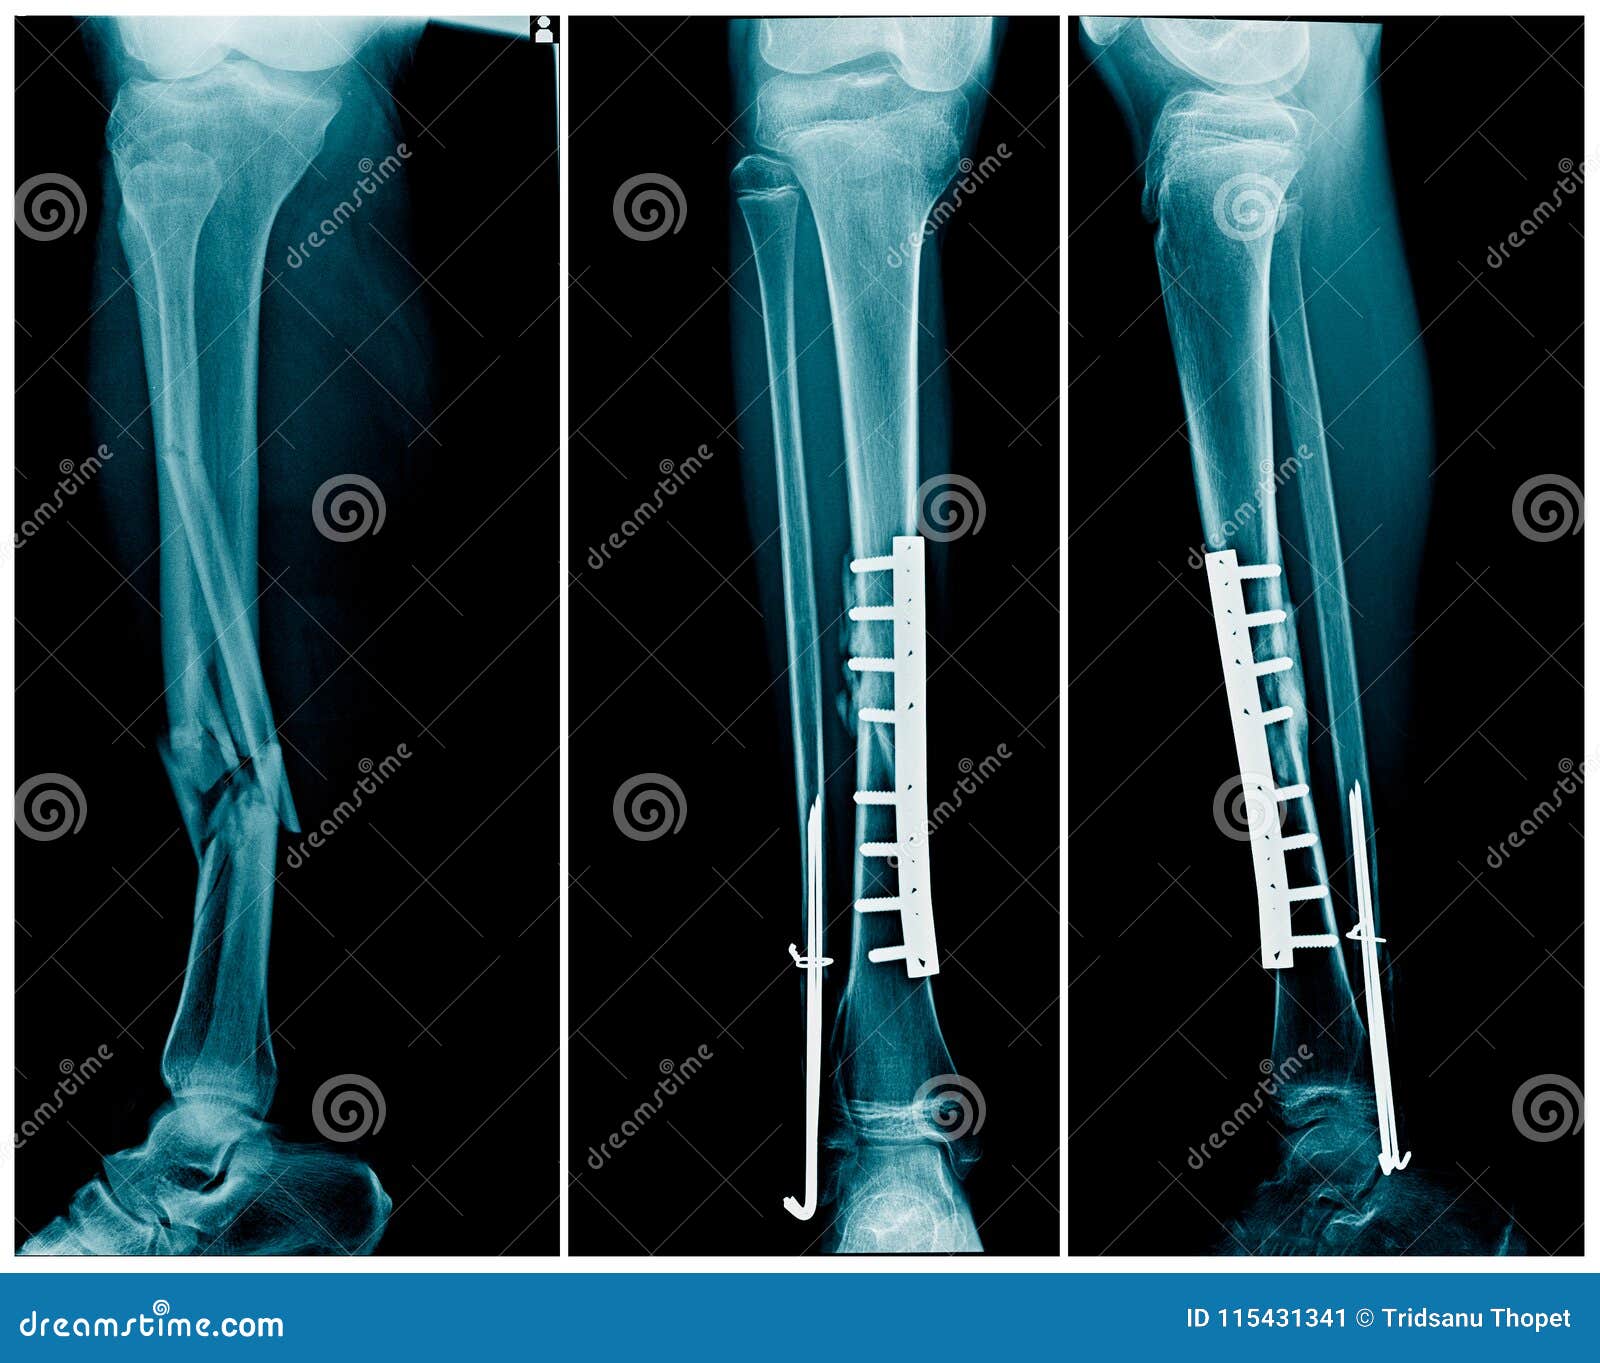 Fracture Of Leg With Post Op Fixation Royalty Free Stock Photography